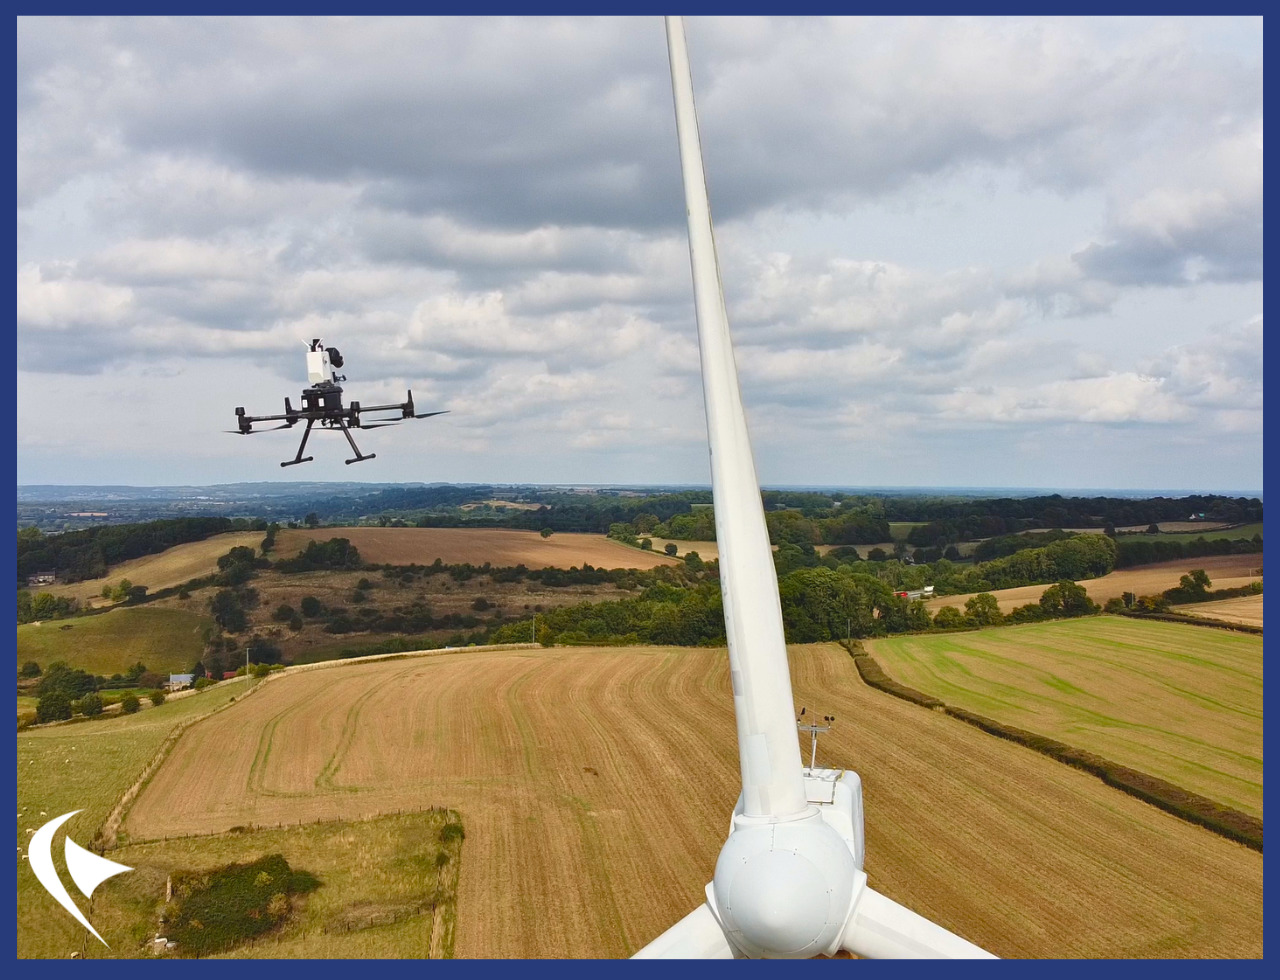 Perceptual Robotics drone and wind turbine with fields in the distance.